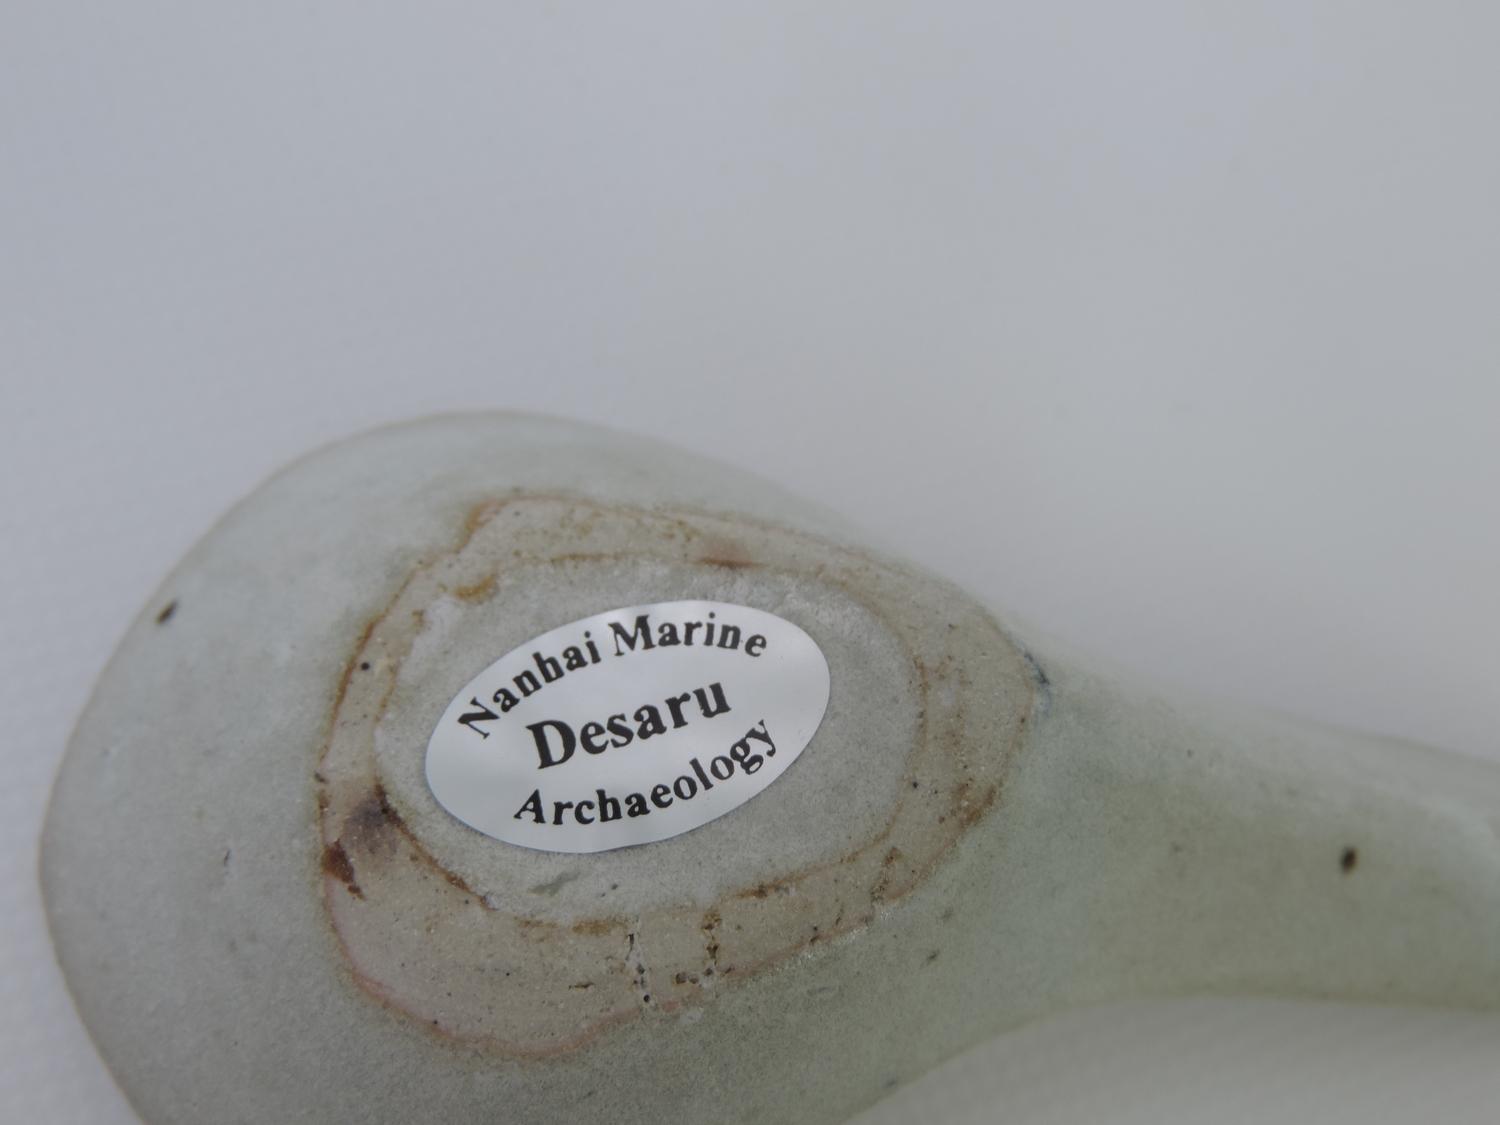 Desaru Shipwreck 'Happy Face' Spoon with Certificate of Authenticity - Nanhai Marine Archaeology - Image 5 of 6